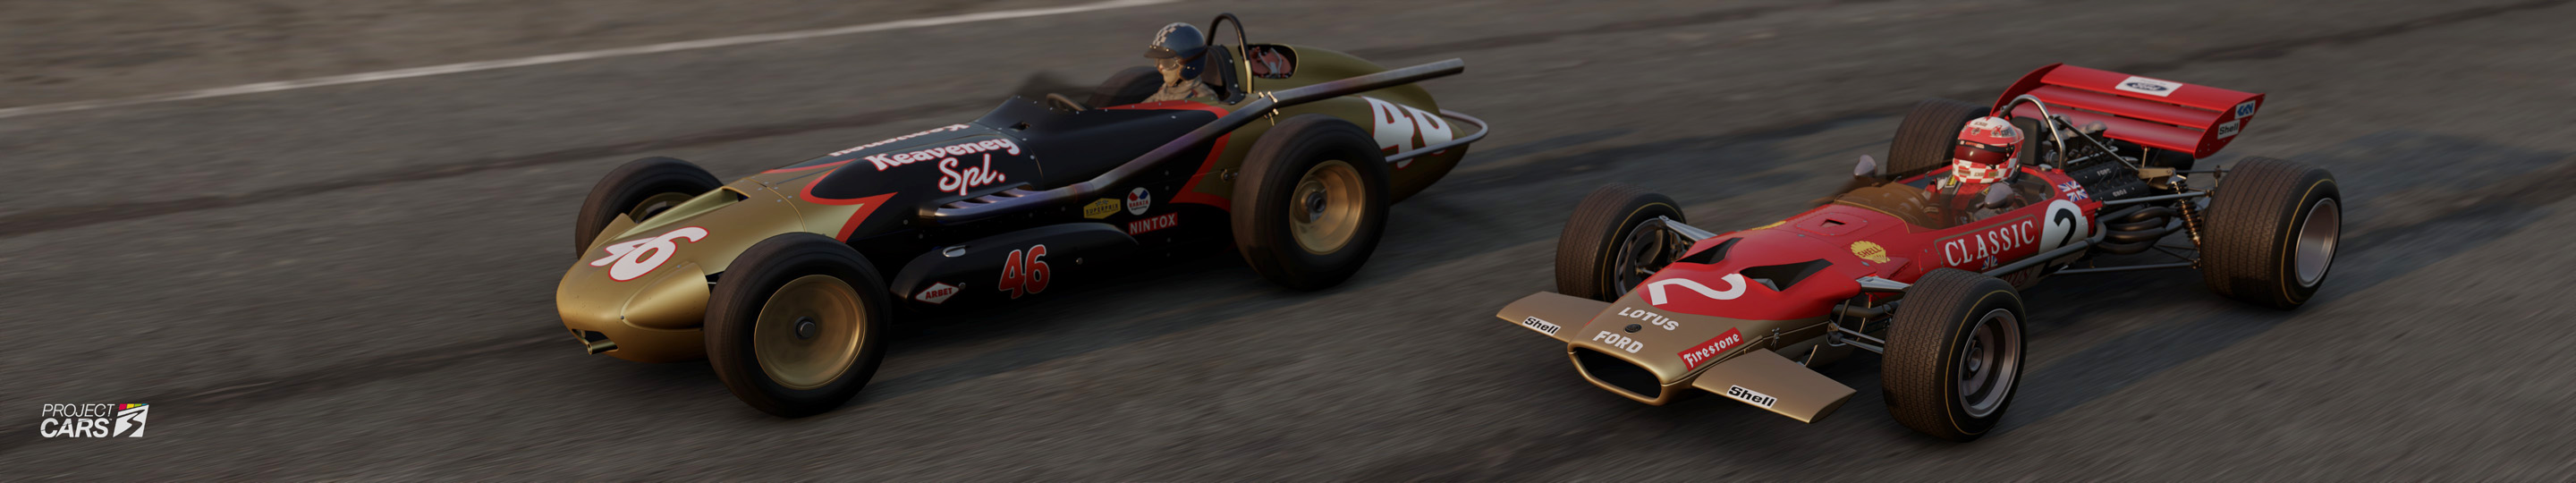 0 PROJECT CARS 3 LOTUS 49C at SILVERSTONE CLASSIC GP copy.jpg